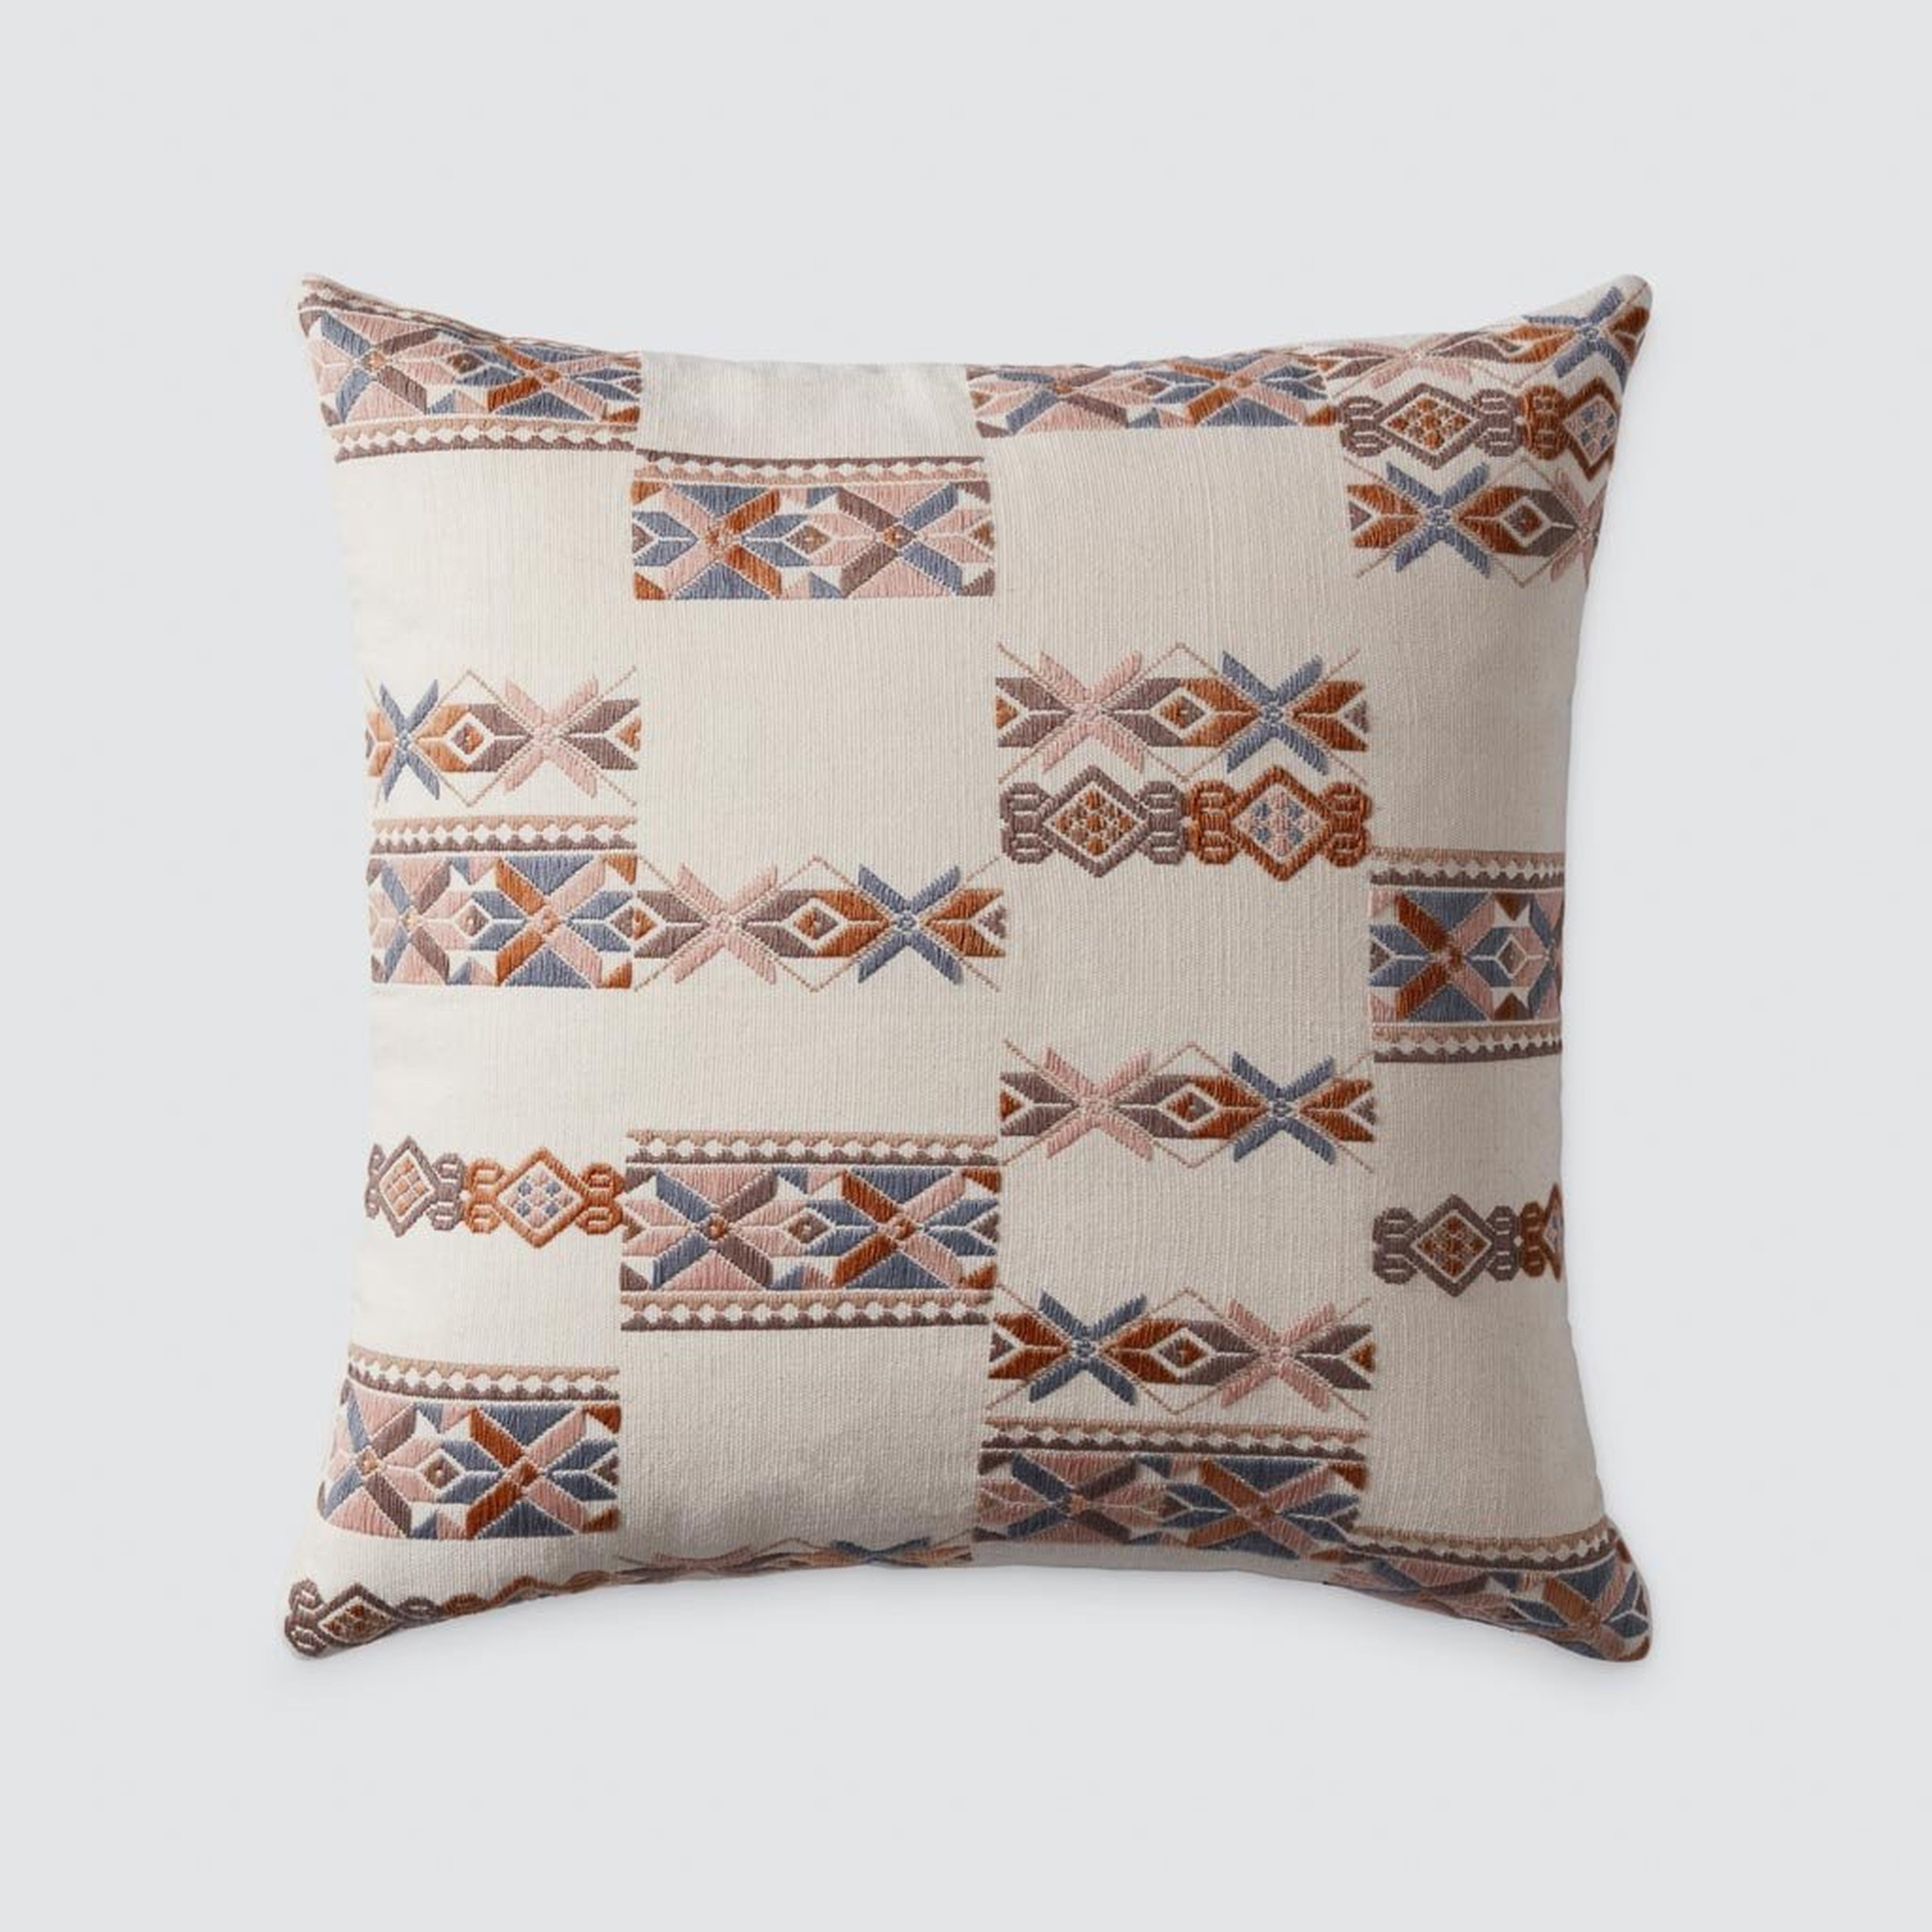 Azalea Pillow By The Citizenry - The Citizenry